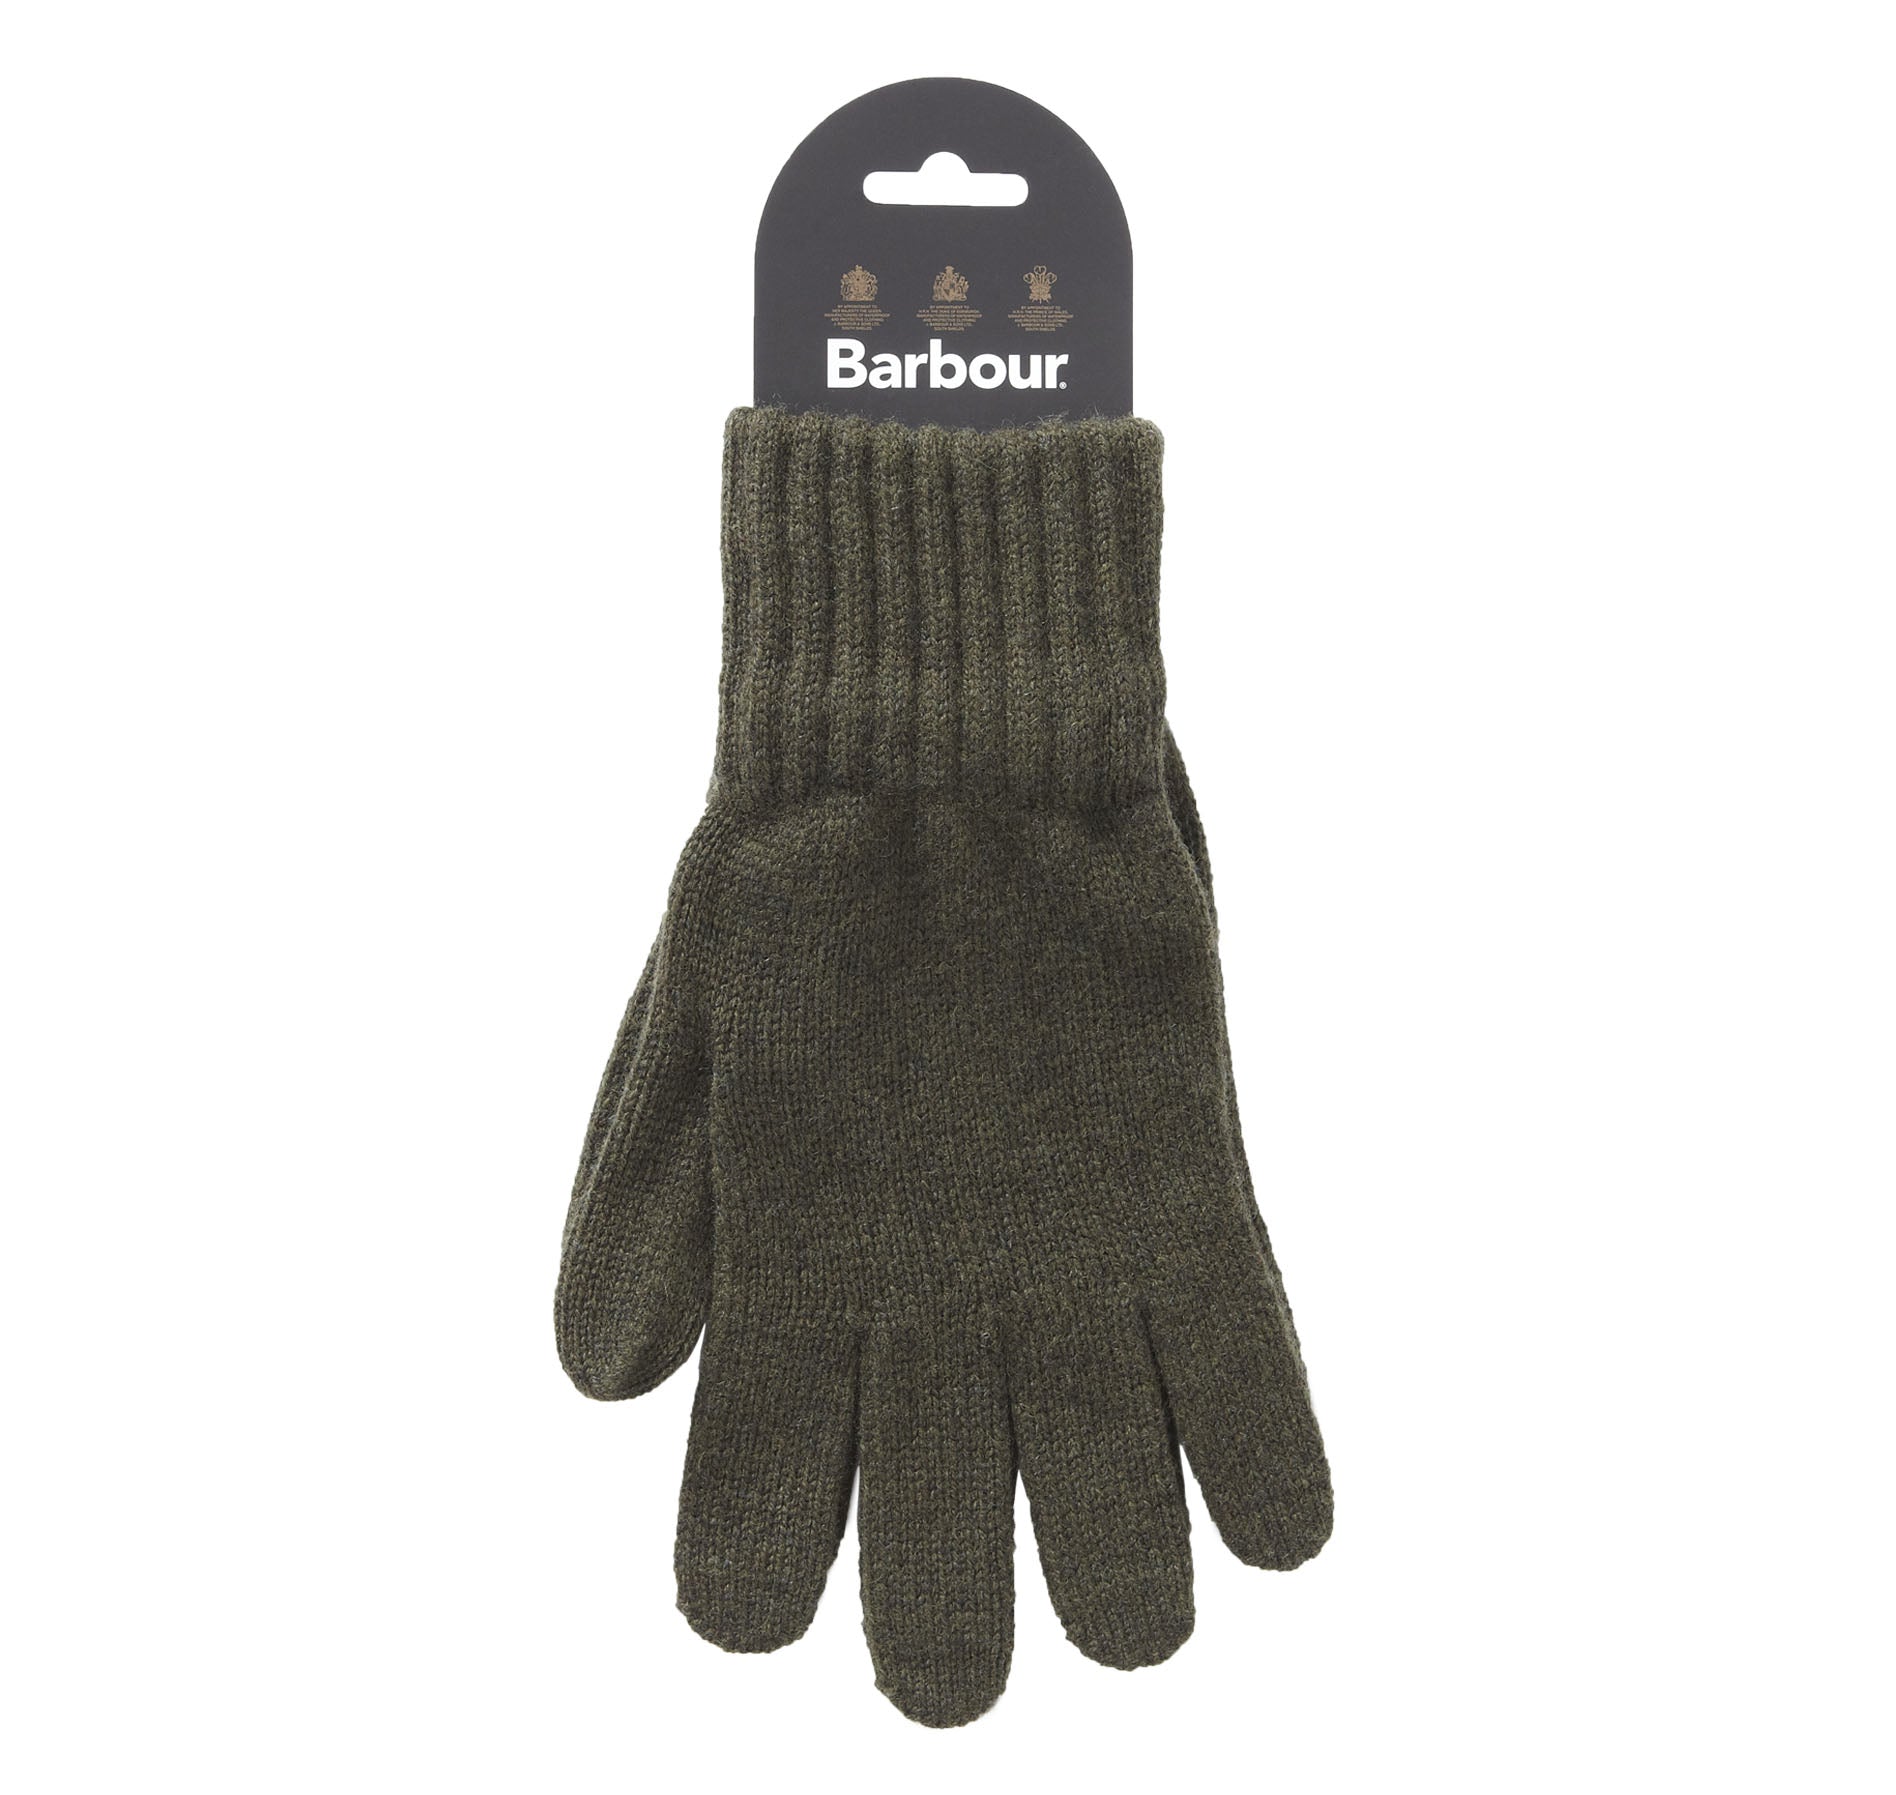 Lambswool Gloves - Olive